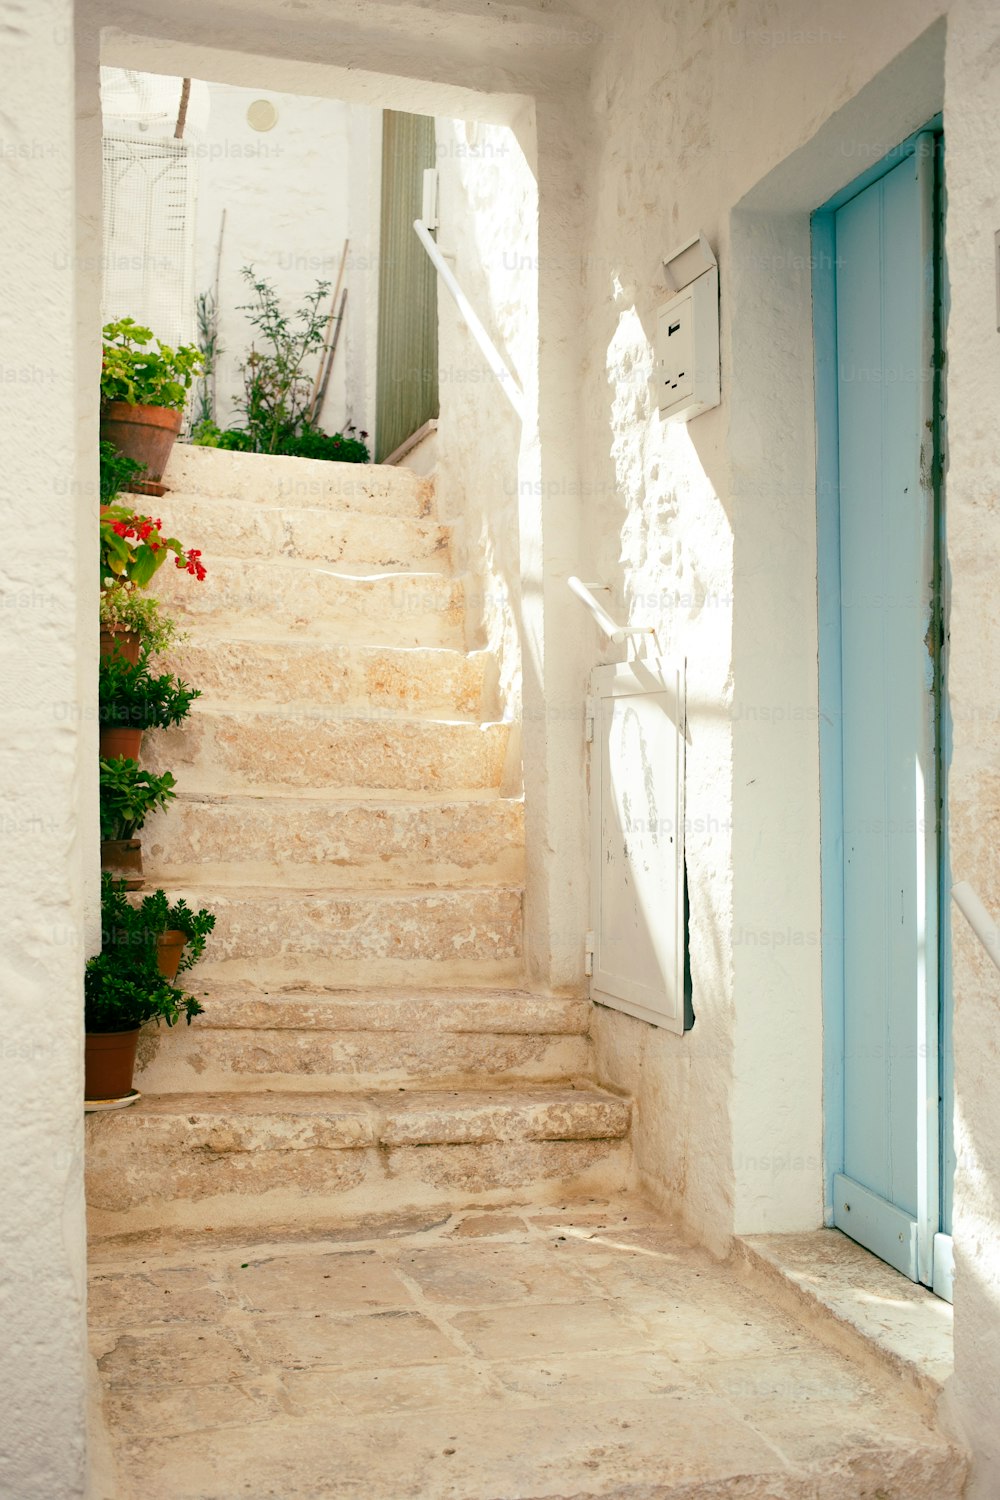 Closed door beside stairs photo – Free Home decor Image on Unsplash